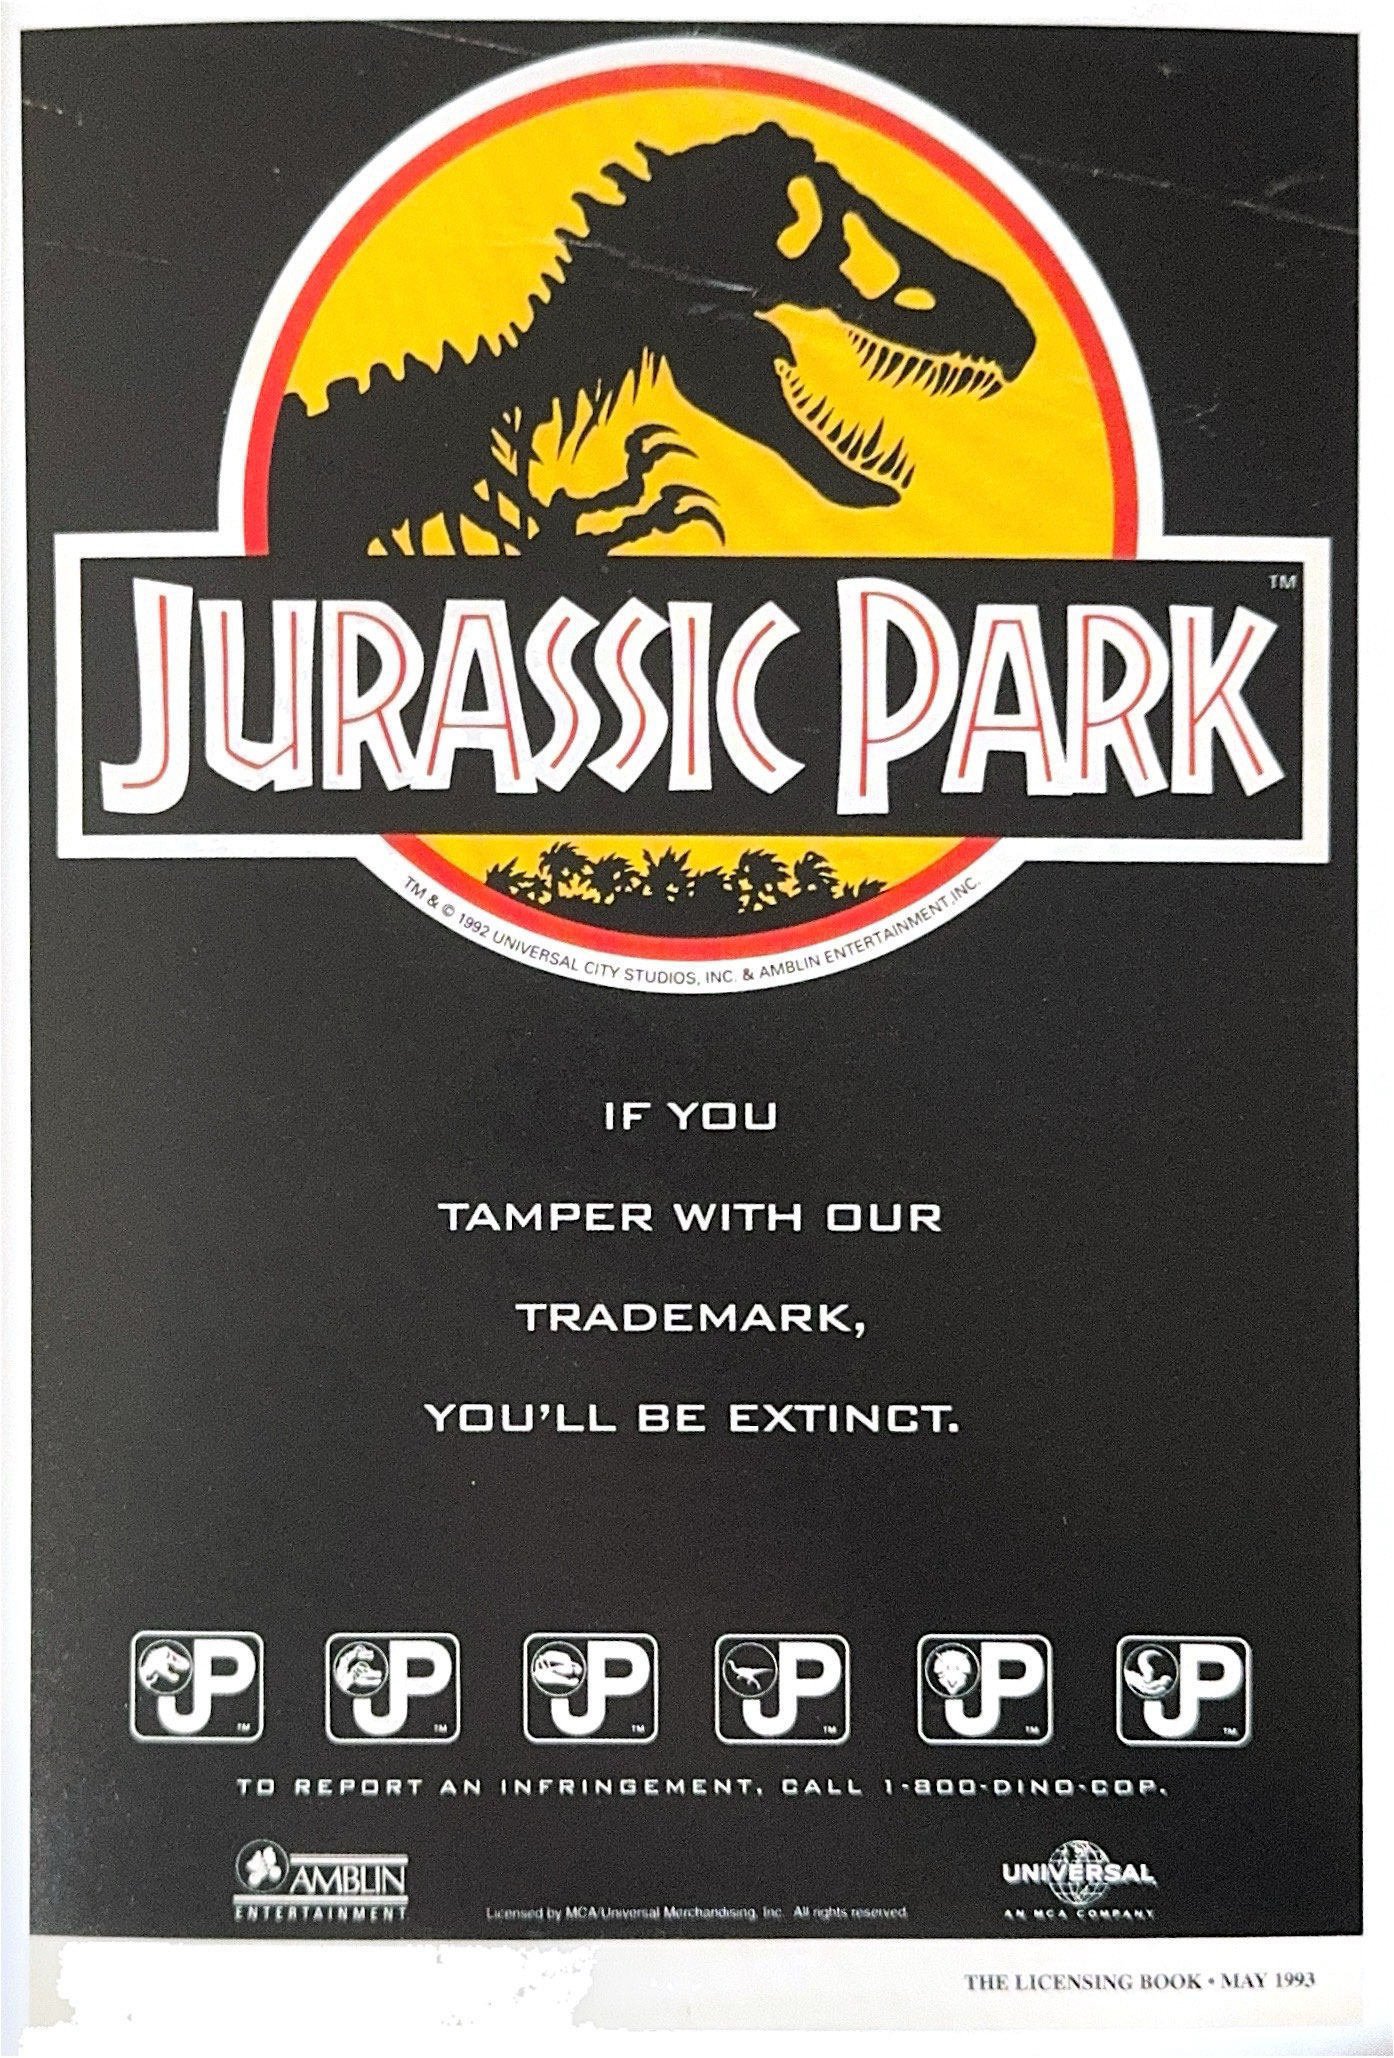 Full page ad from The Licensing Book, May 1993. Large Jurassic Park logo with caption below: If you tamper with our trademark, you'll be extinct. To report an infringement, call 1-800-DINO-COP.